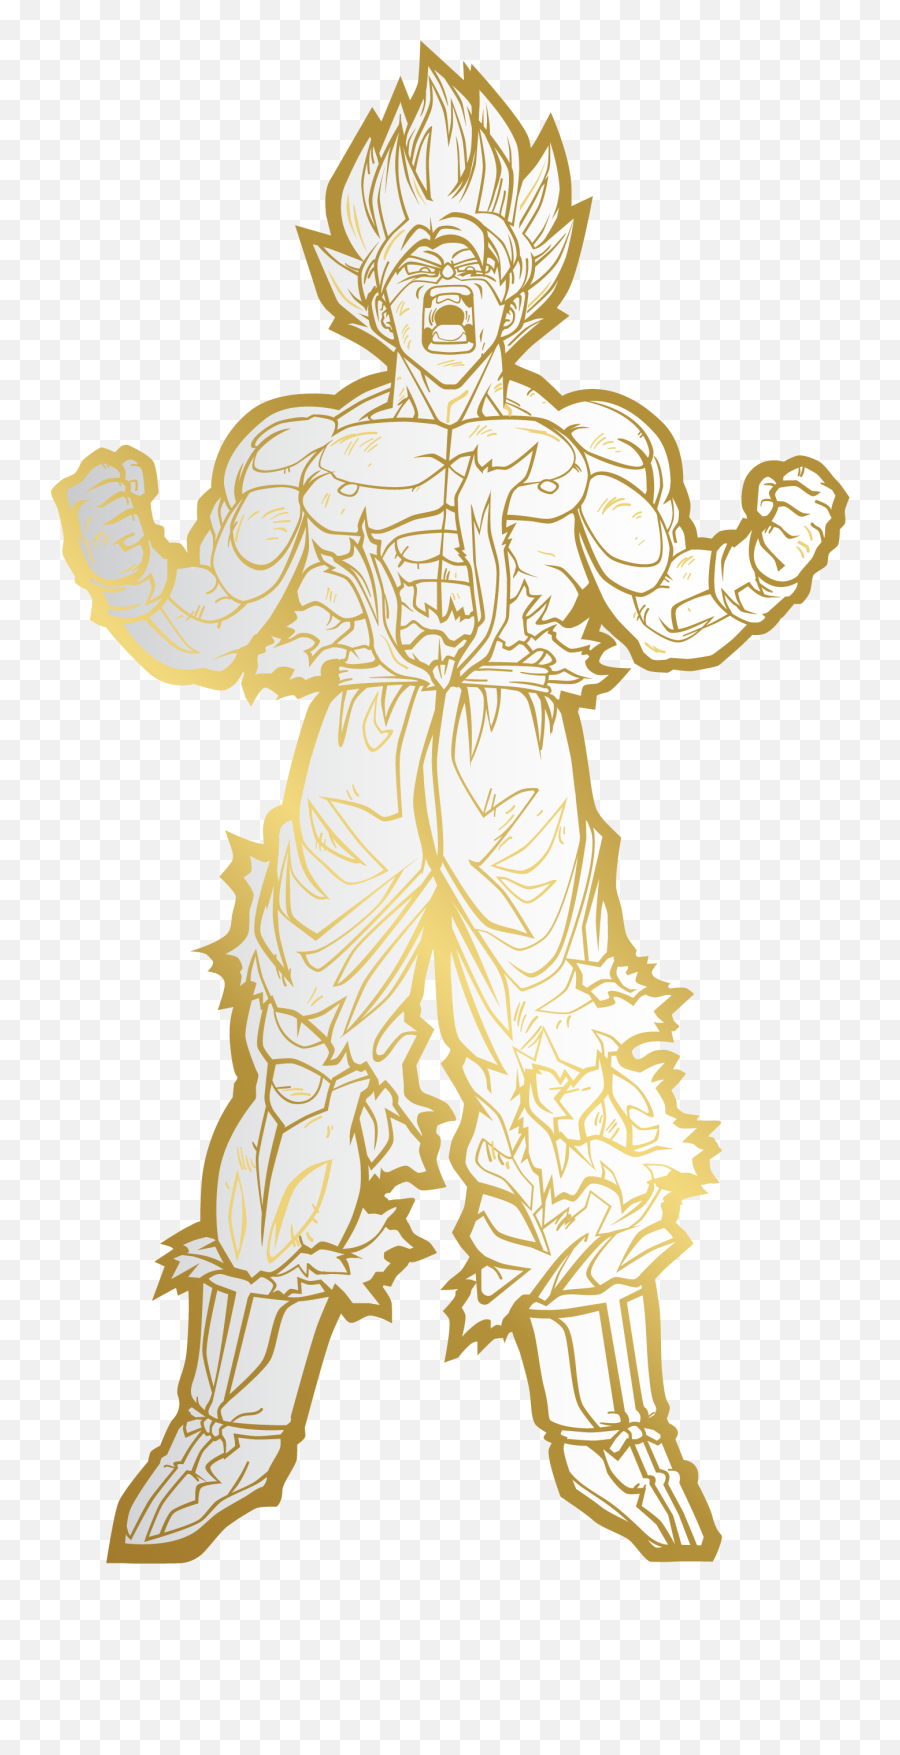 Goku Sketch  Version 2  No Background Poster for Sale by THAILER HUYNH   Redbubble